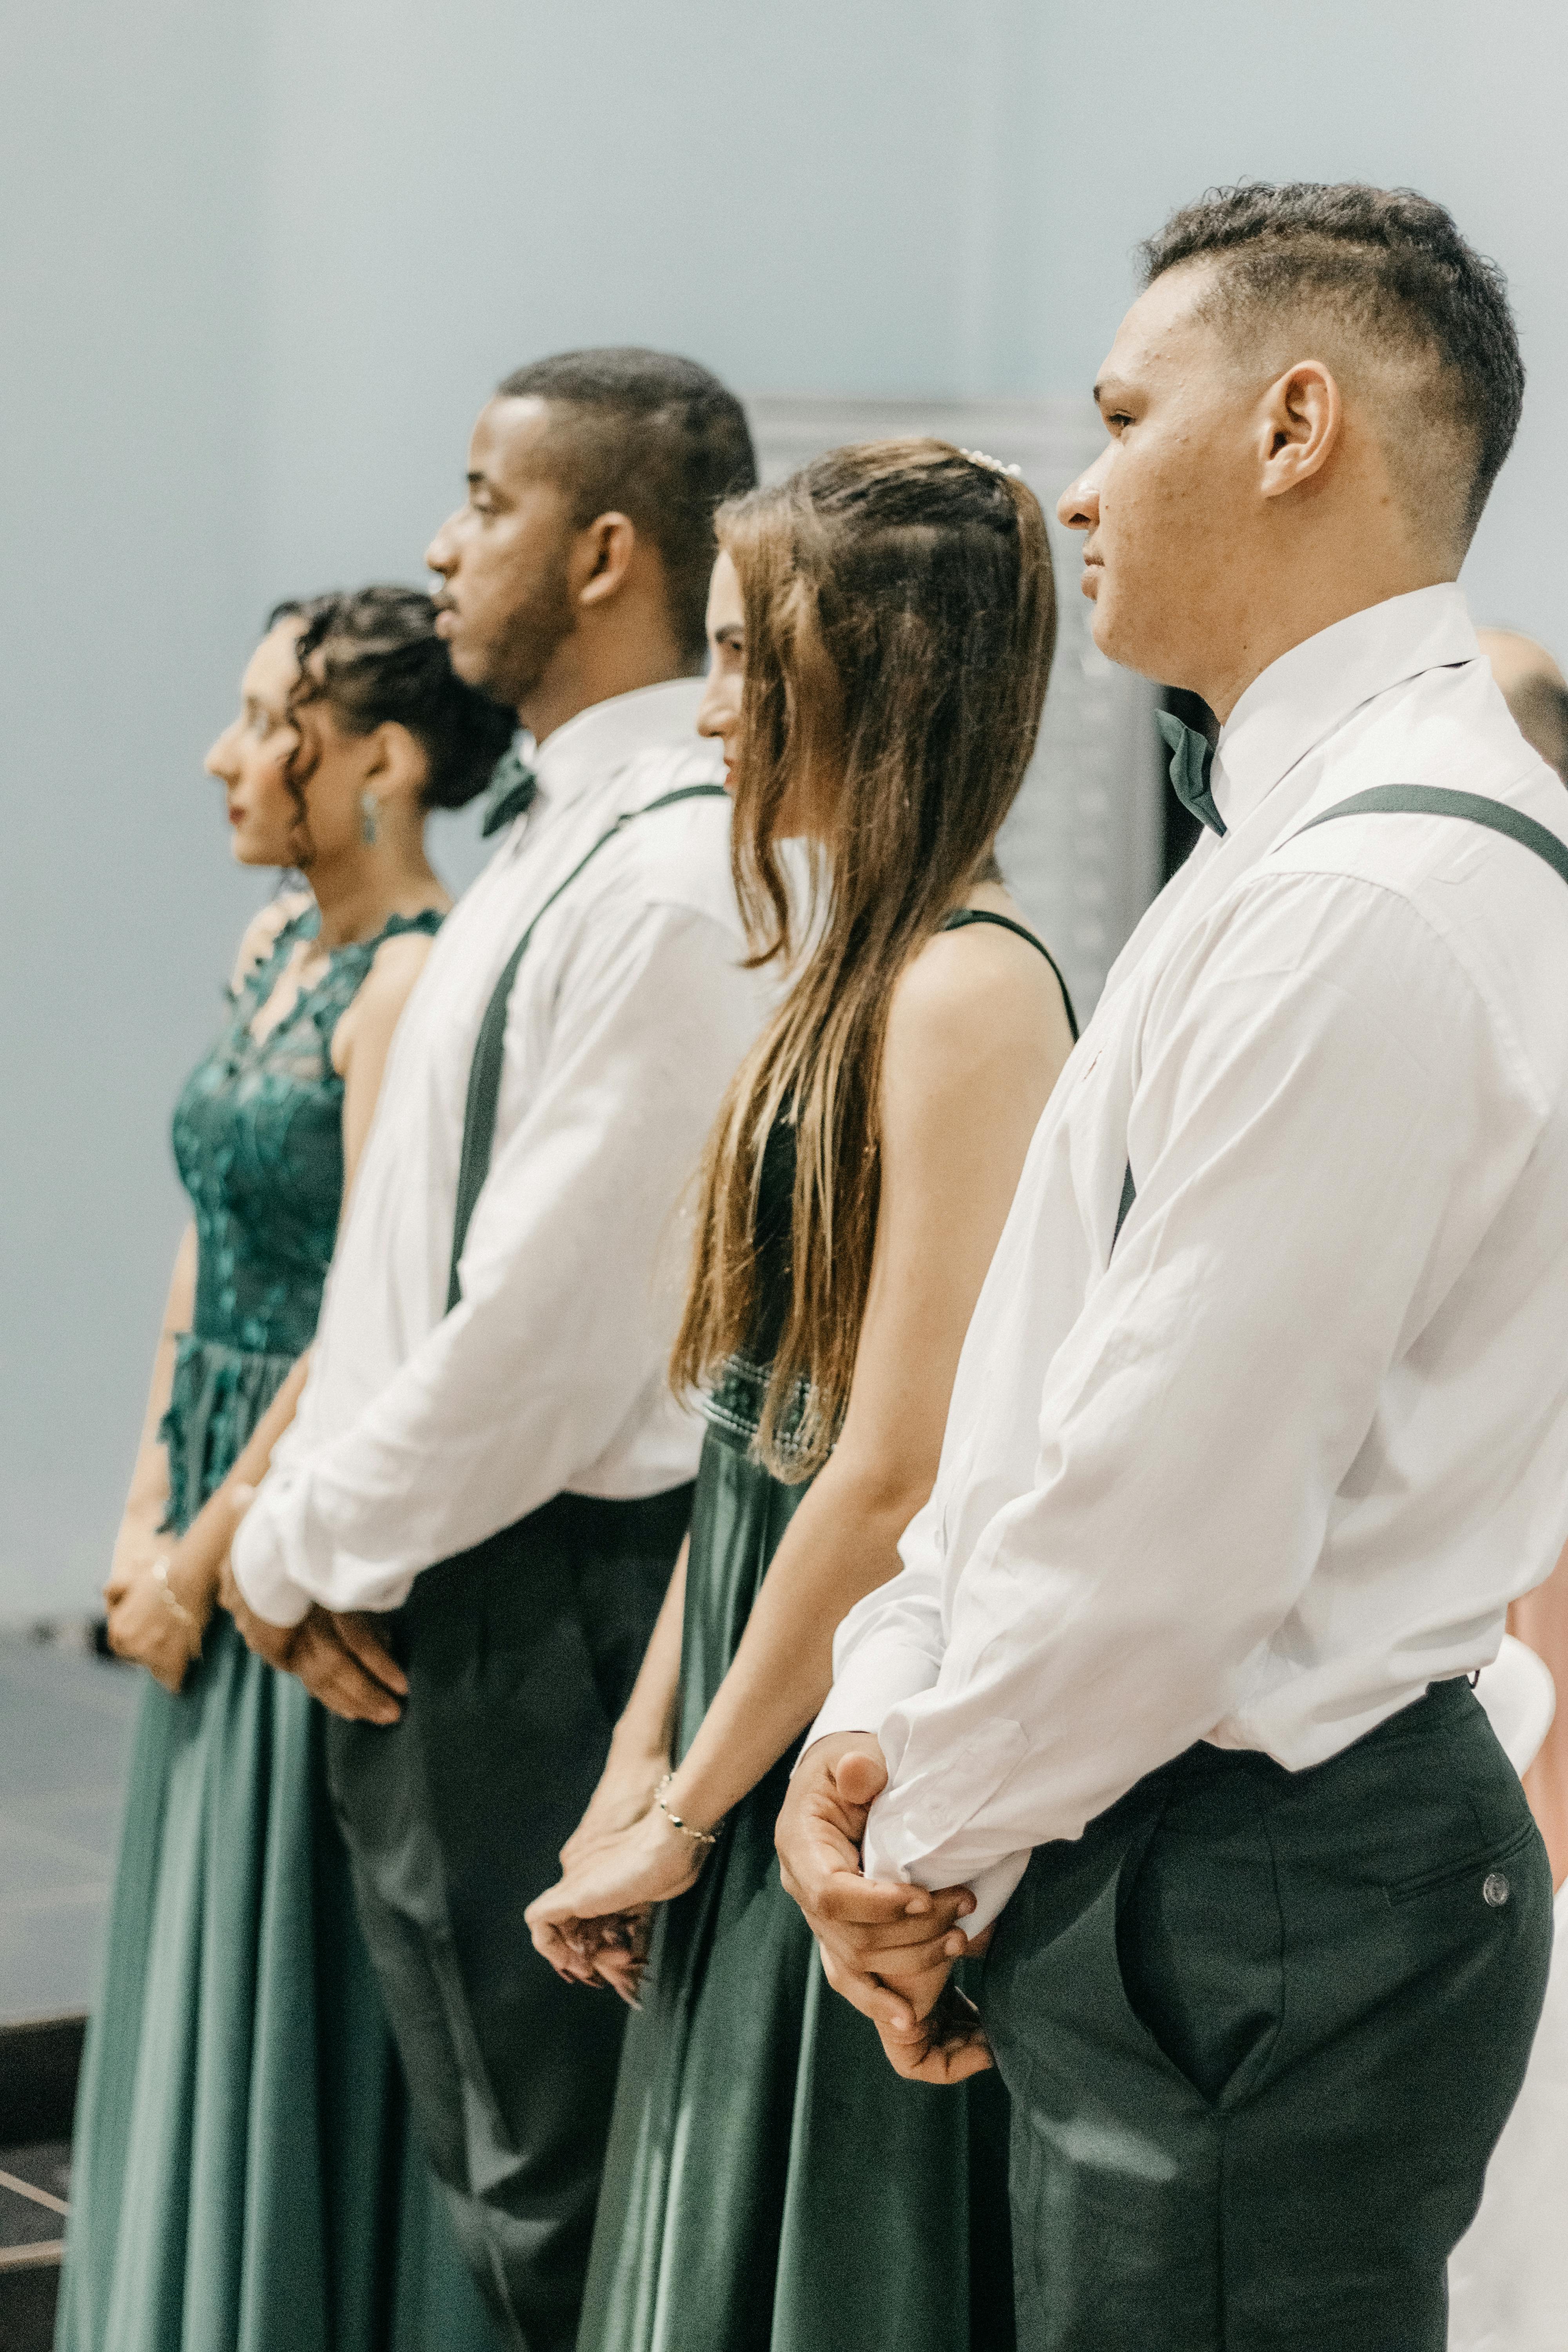 Guests at a wedding stand up | Source: Pexels